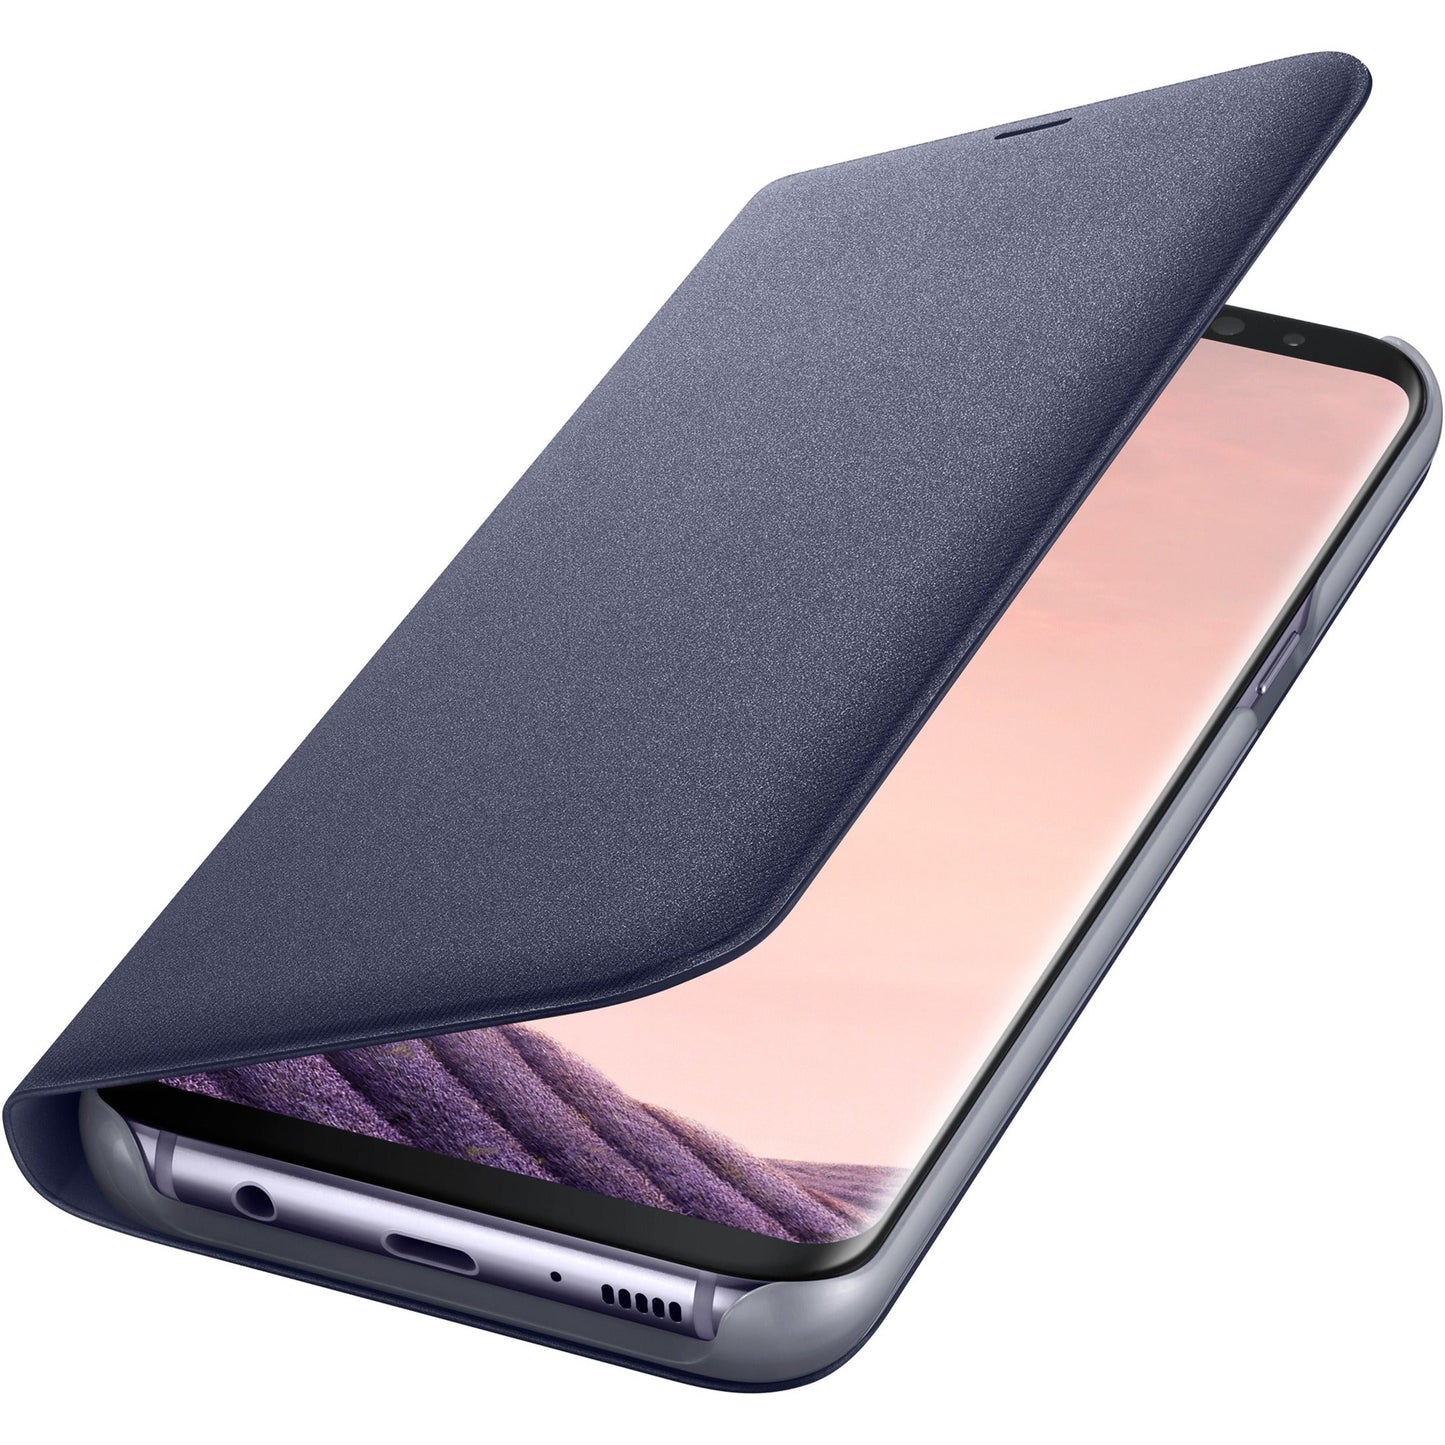 Samsung Carrying Case (Wallet) Smartphone Credit Card - Orchid Gray